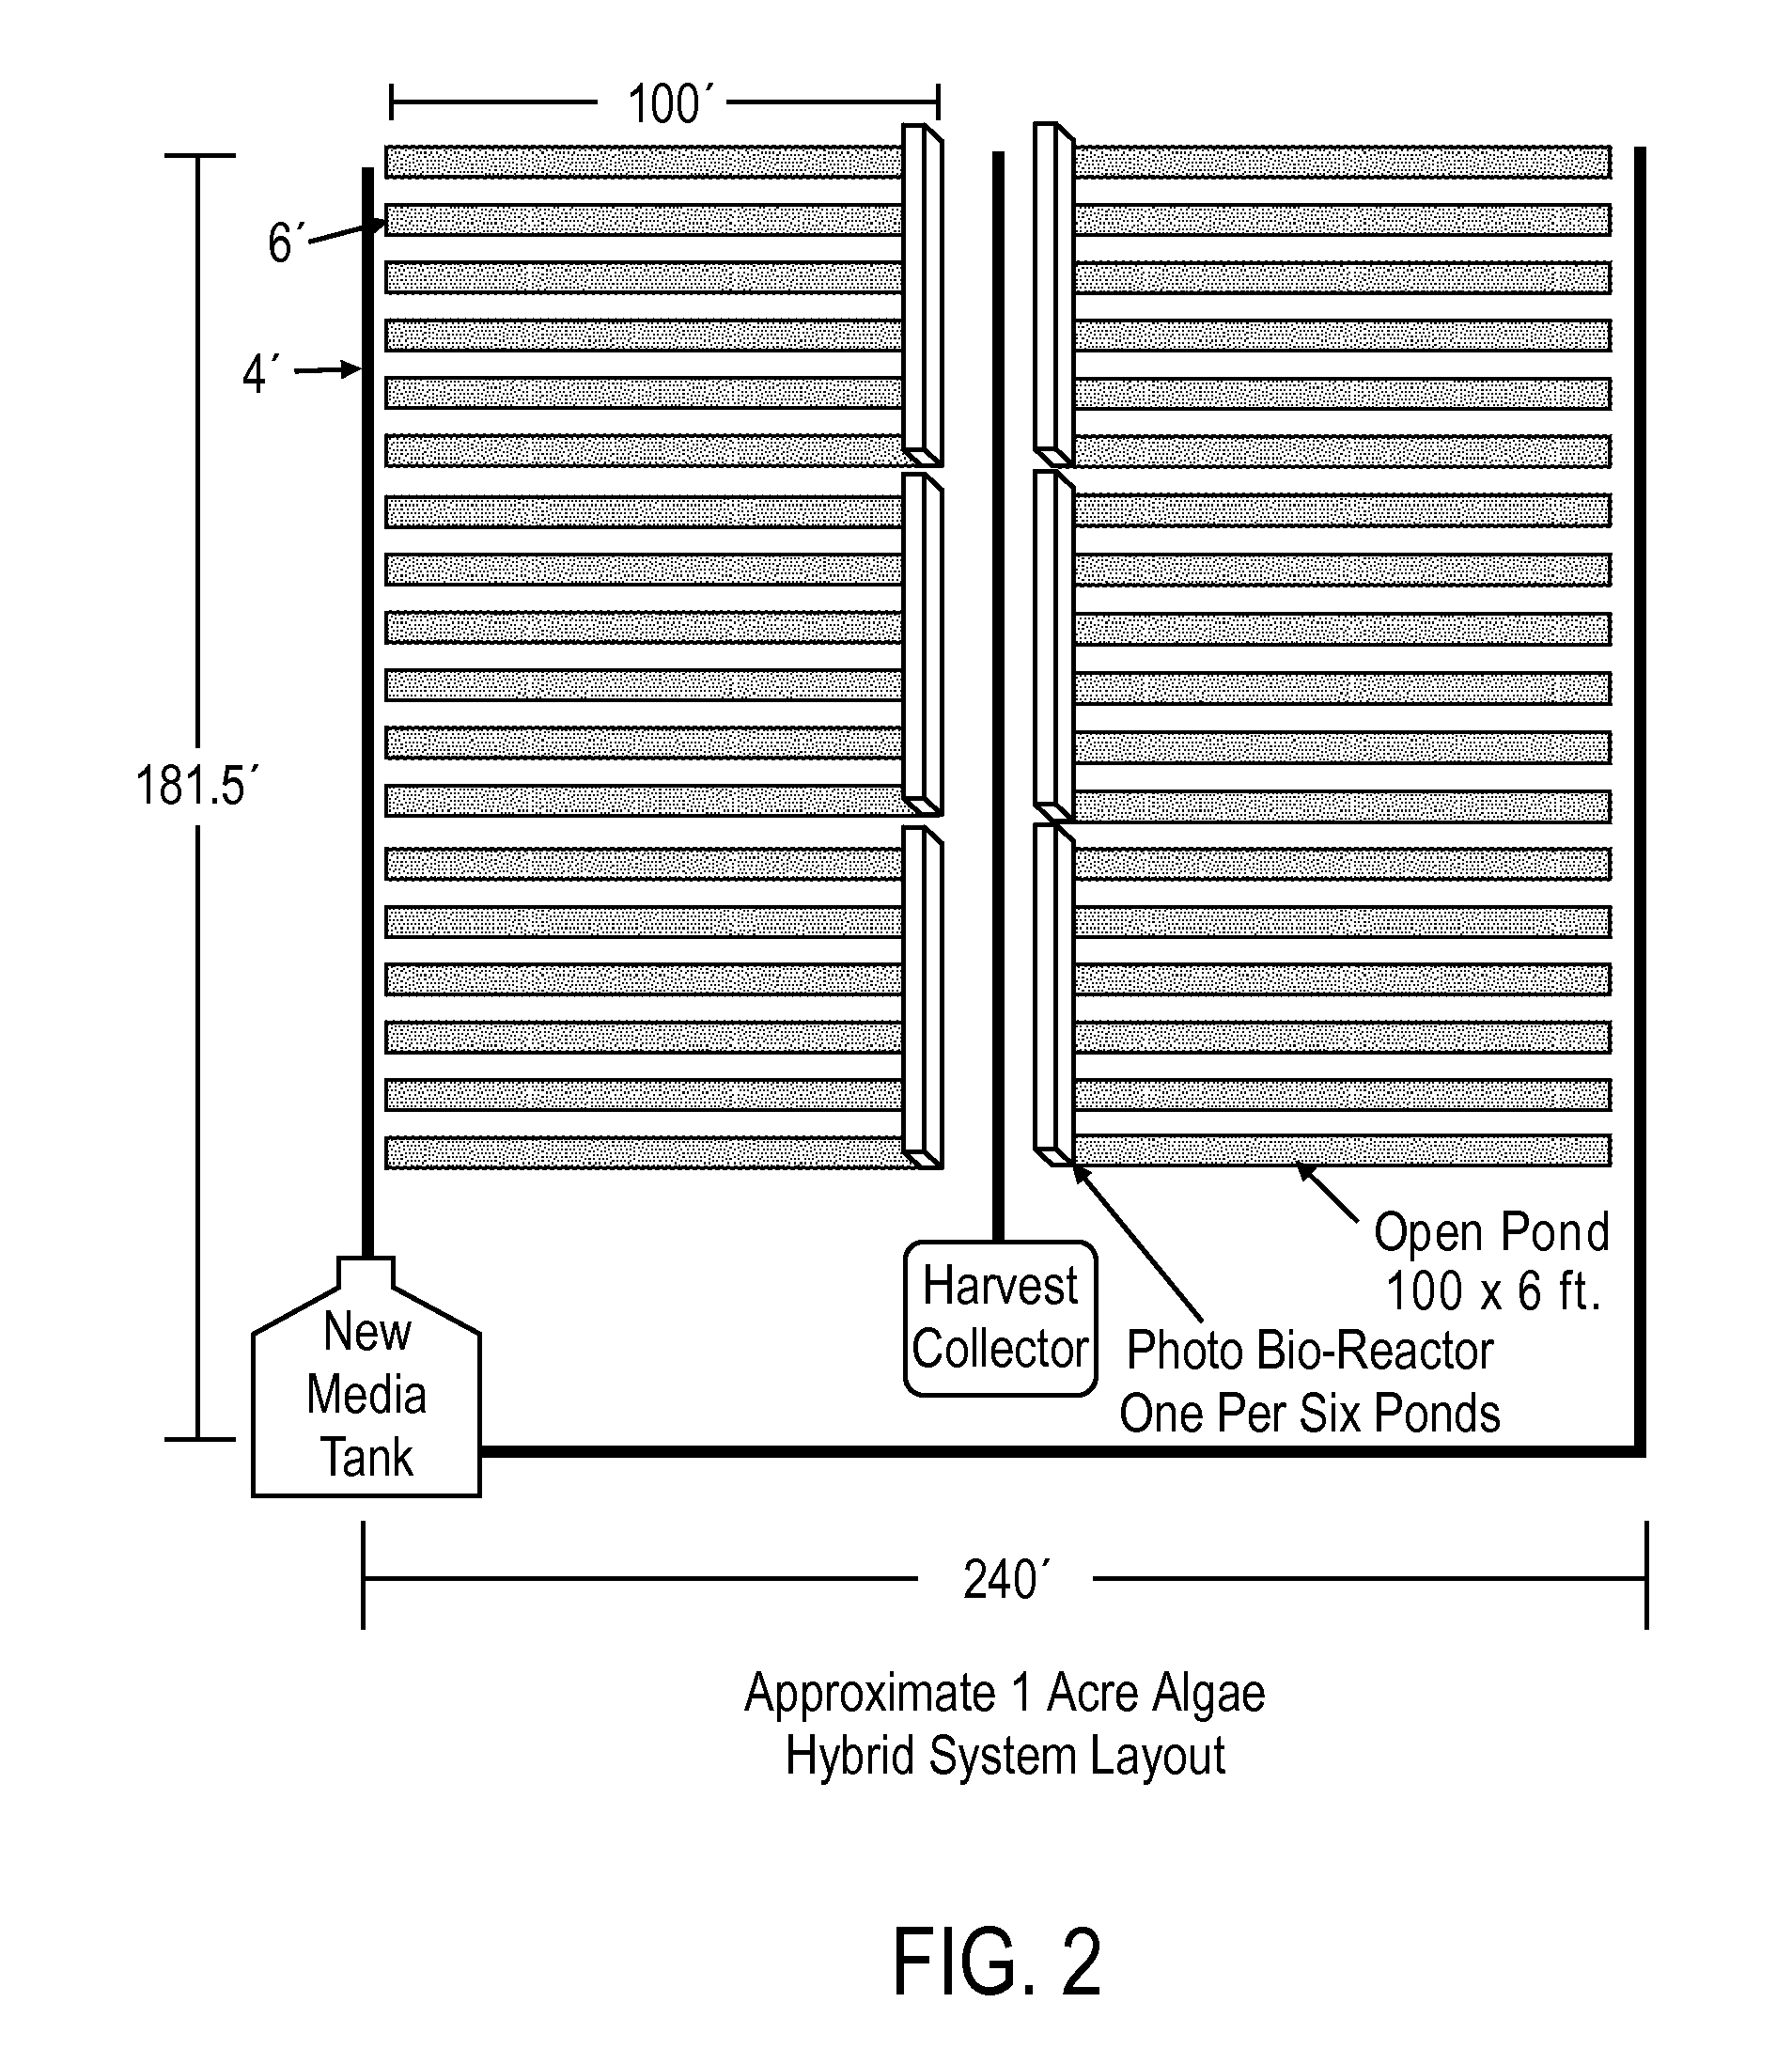 Systems and Methods for Large-Scale Production and Harvesting of Oil-Rich Algae